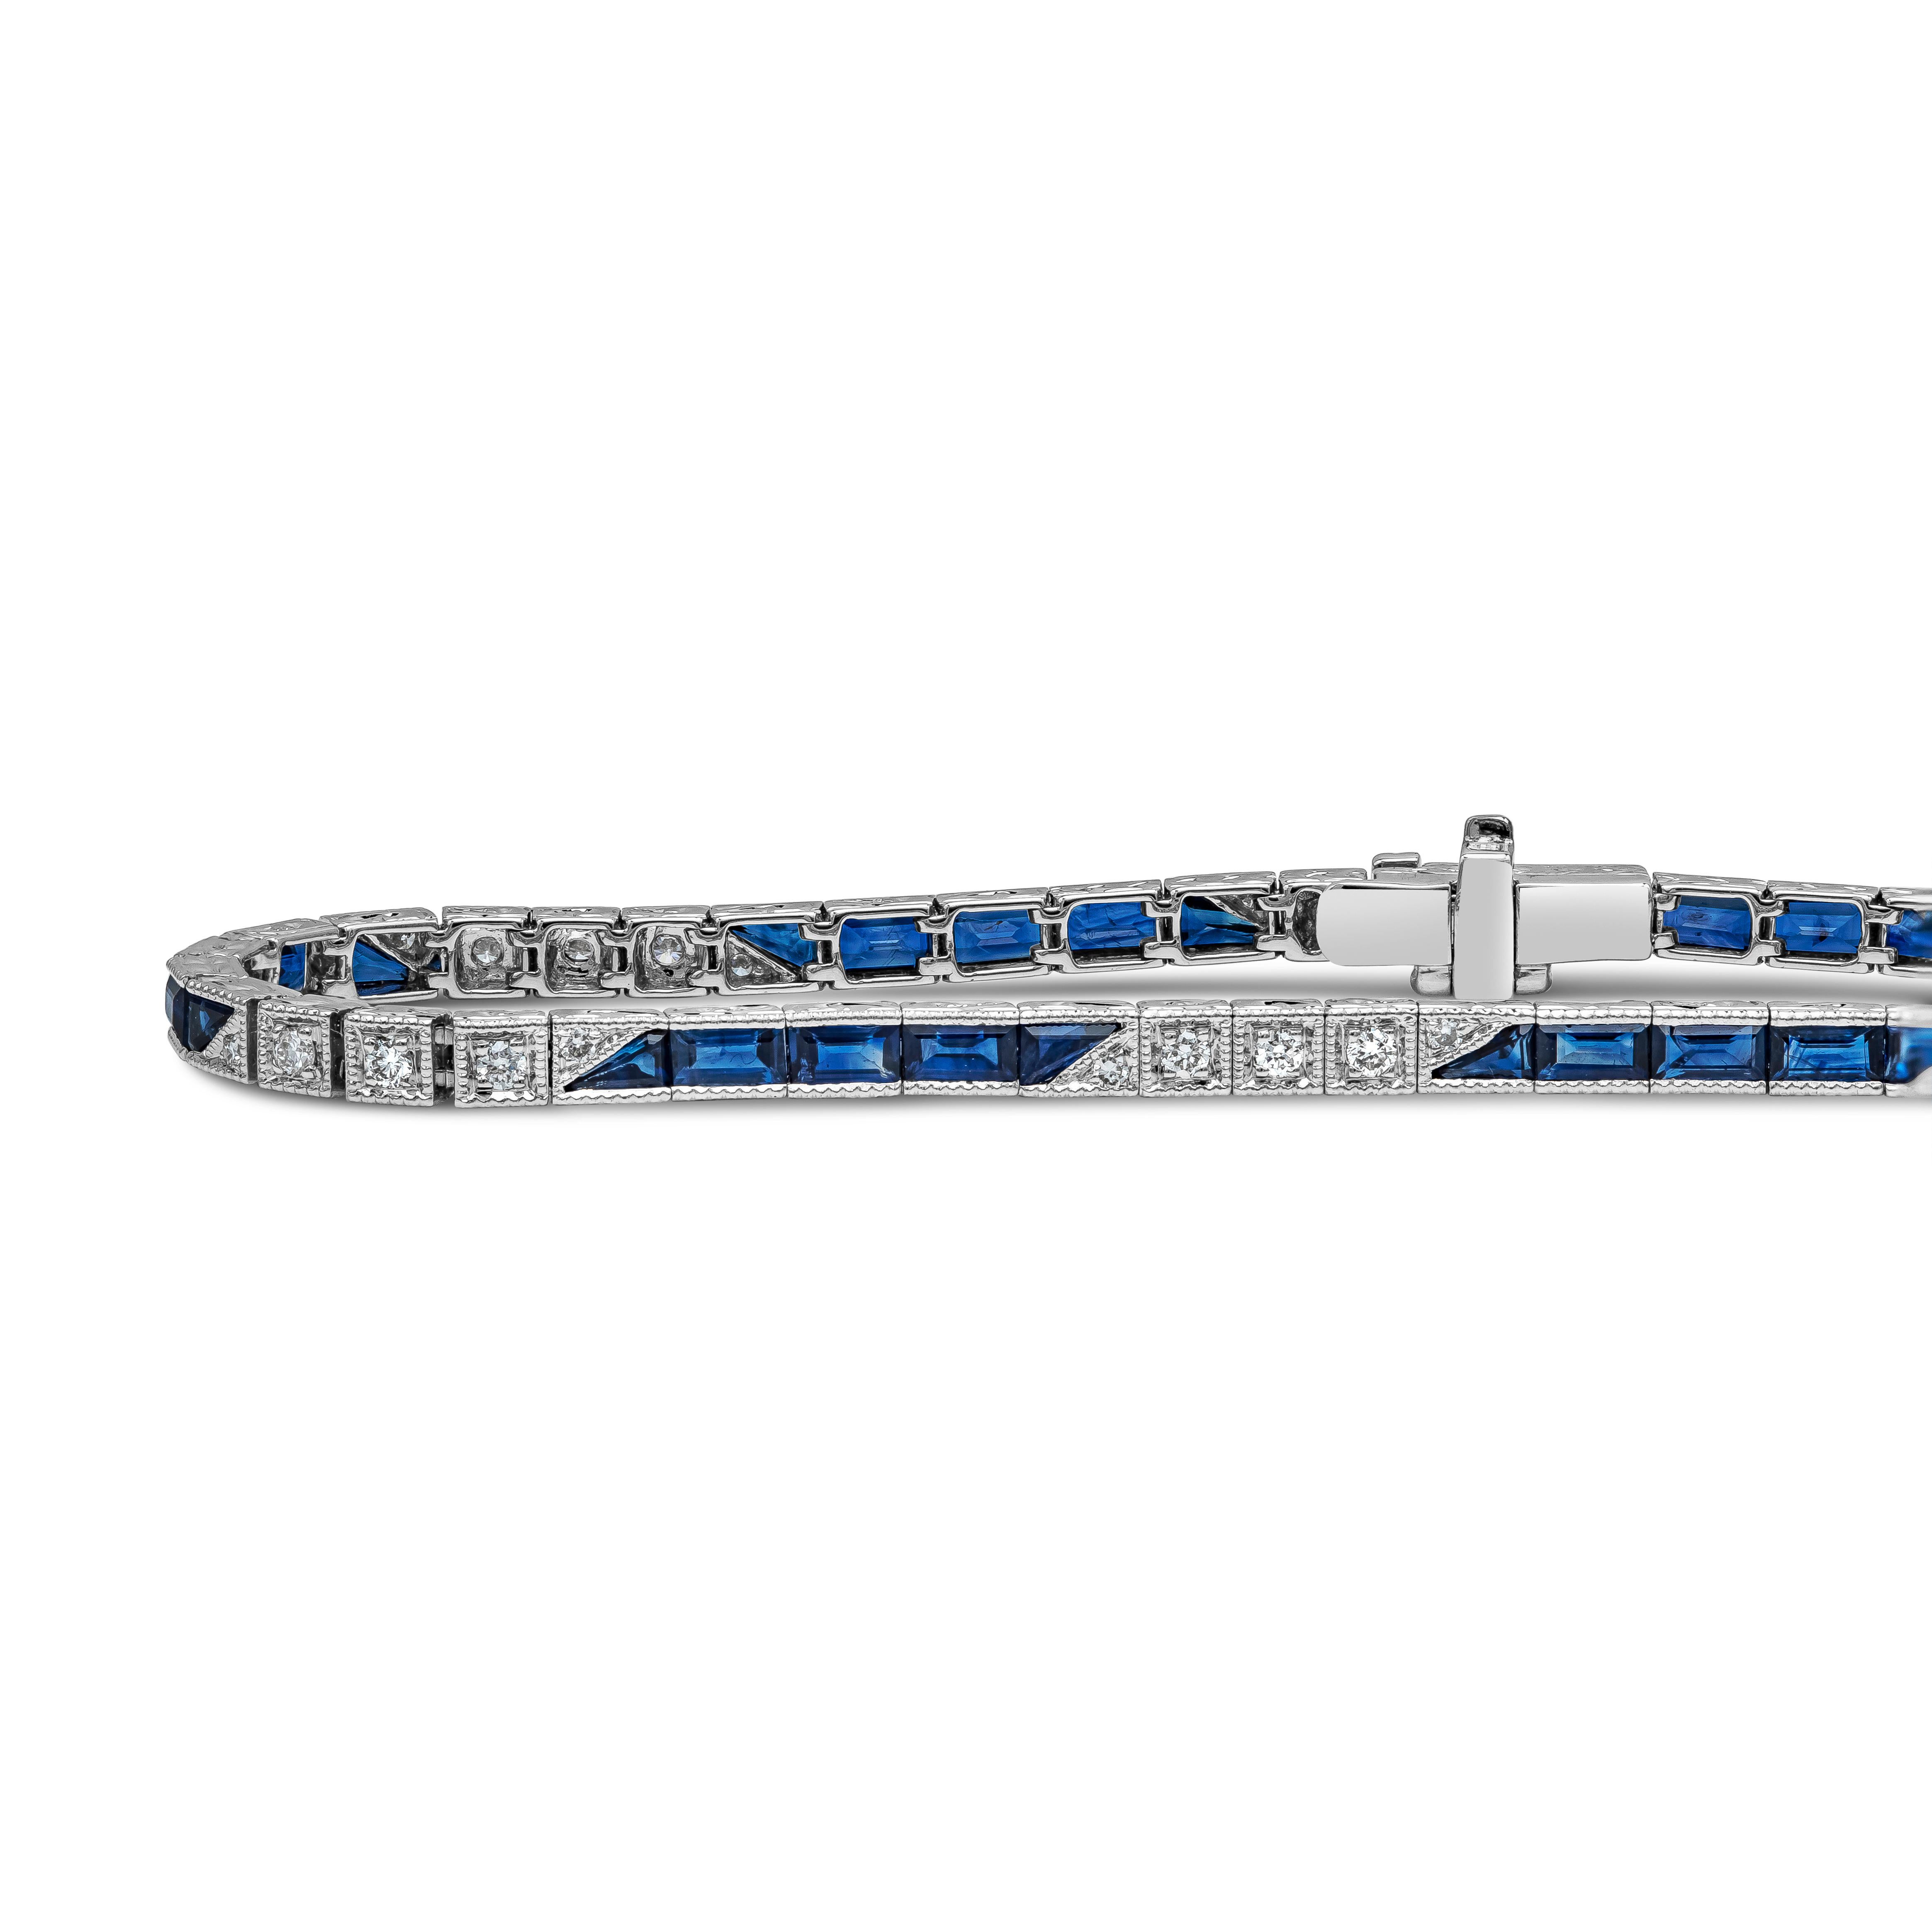 An antique-looking bracelet showcasing vibrant blue sapphires, alternating with round brilliant diamonds set in a beaded-edge tennis bracelet style. Made in 18k white gold. Sapphires weigh 4.39 carats total; diamonds weigh 0.35 carats total. 

Roman